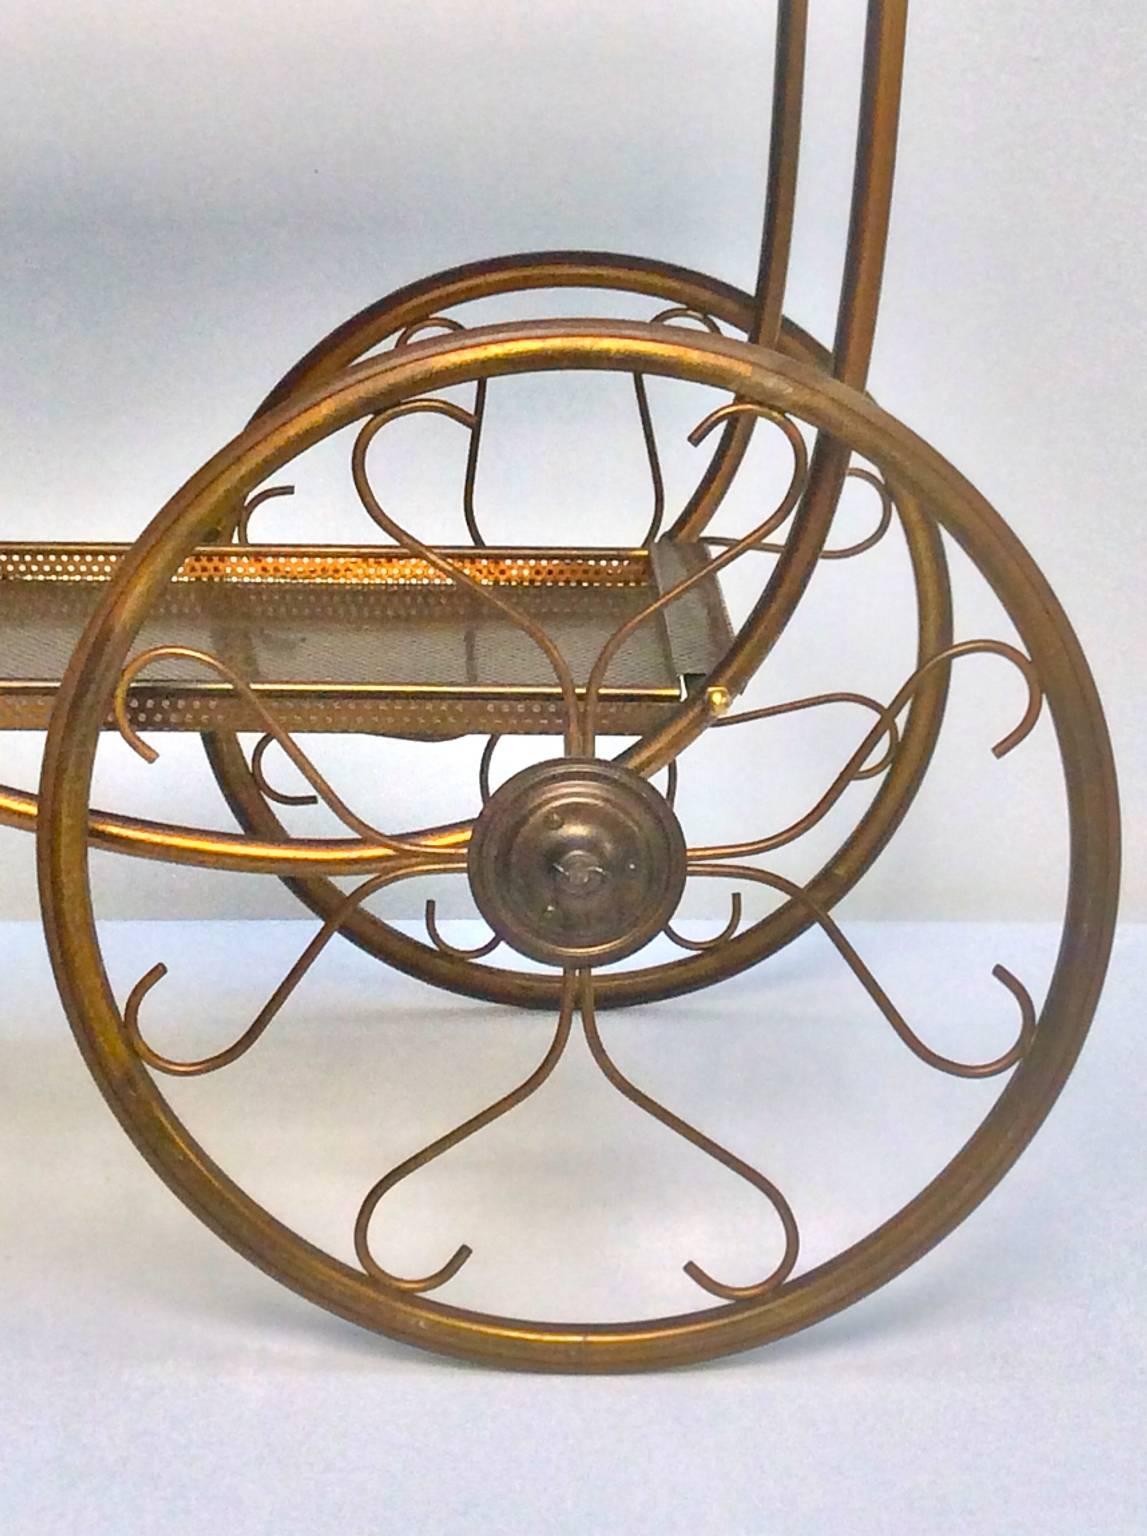 Brass tea or bar cart or trolley by Svenskt Tenn, Sweden, 1950s.

***

From 27 September until 2 October you can see this piece at the Decorative Antiques & Textiles Fair in London

***

A delicate, decorative piece with a tubular brass